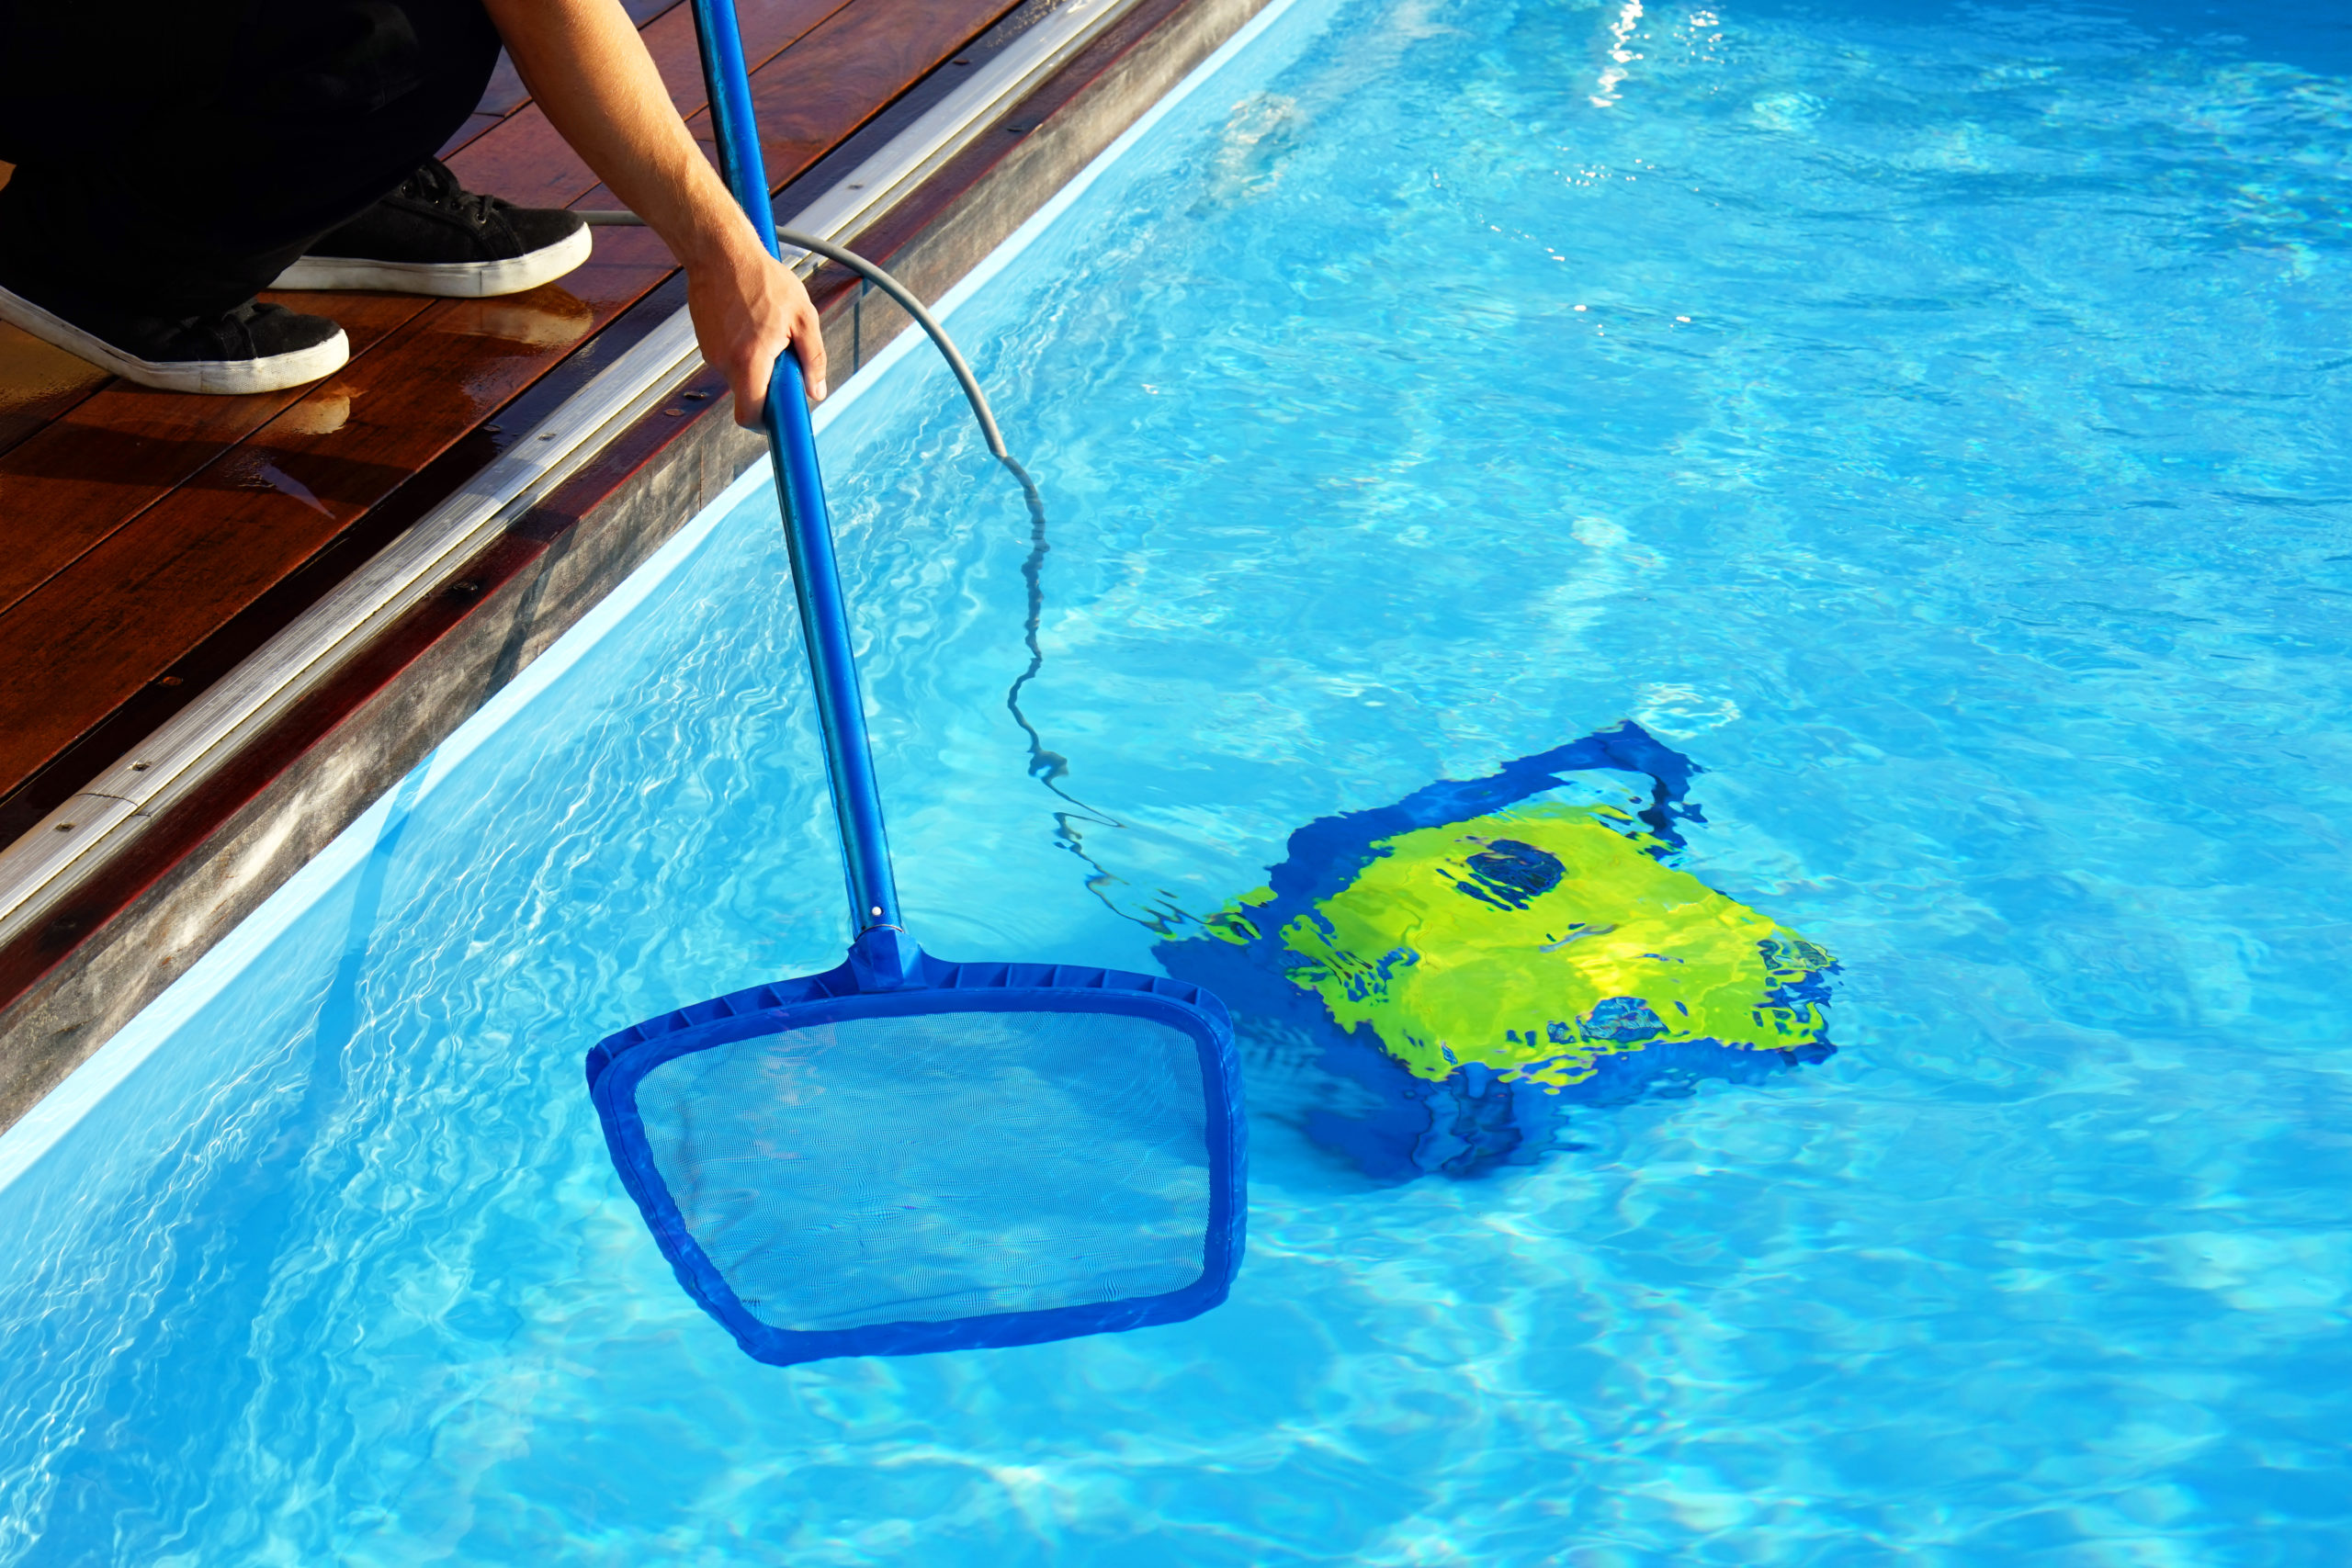 An automatic pool vacuum cleaner, a robotic device designed to clean and maintain the cleanliness of swimming pool surfaces automatically.